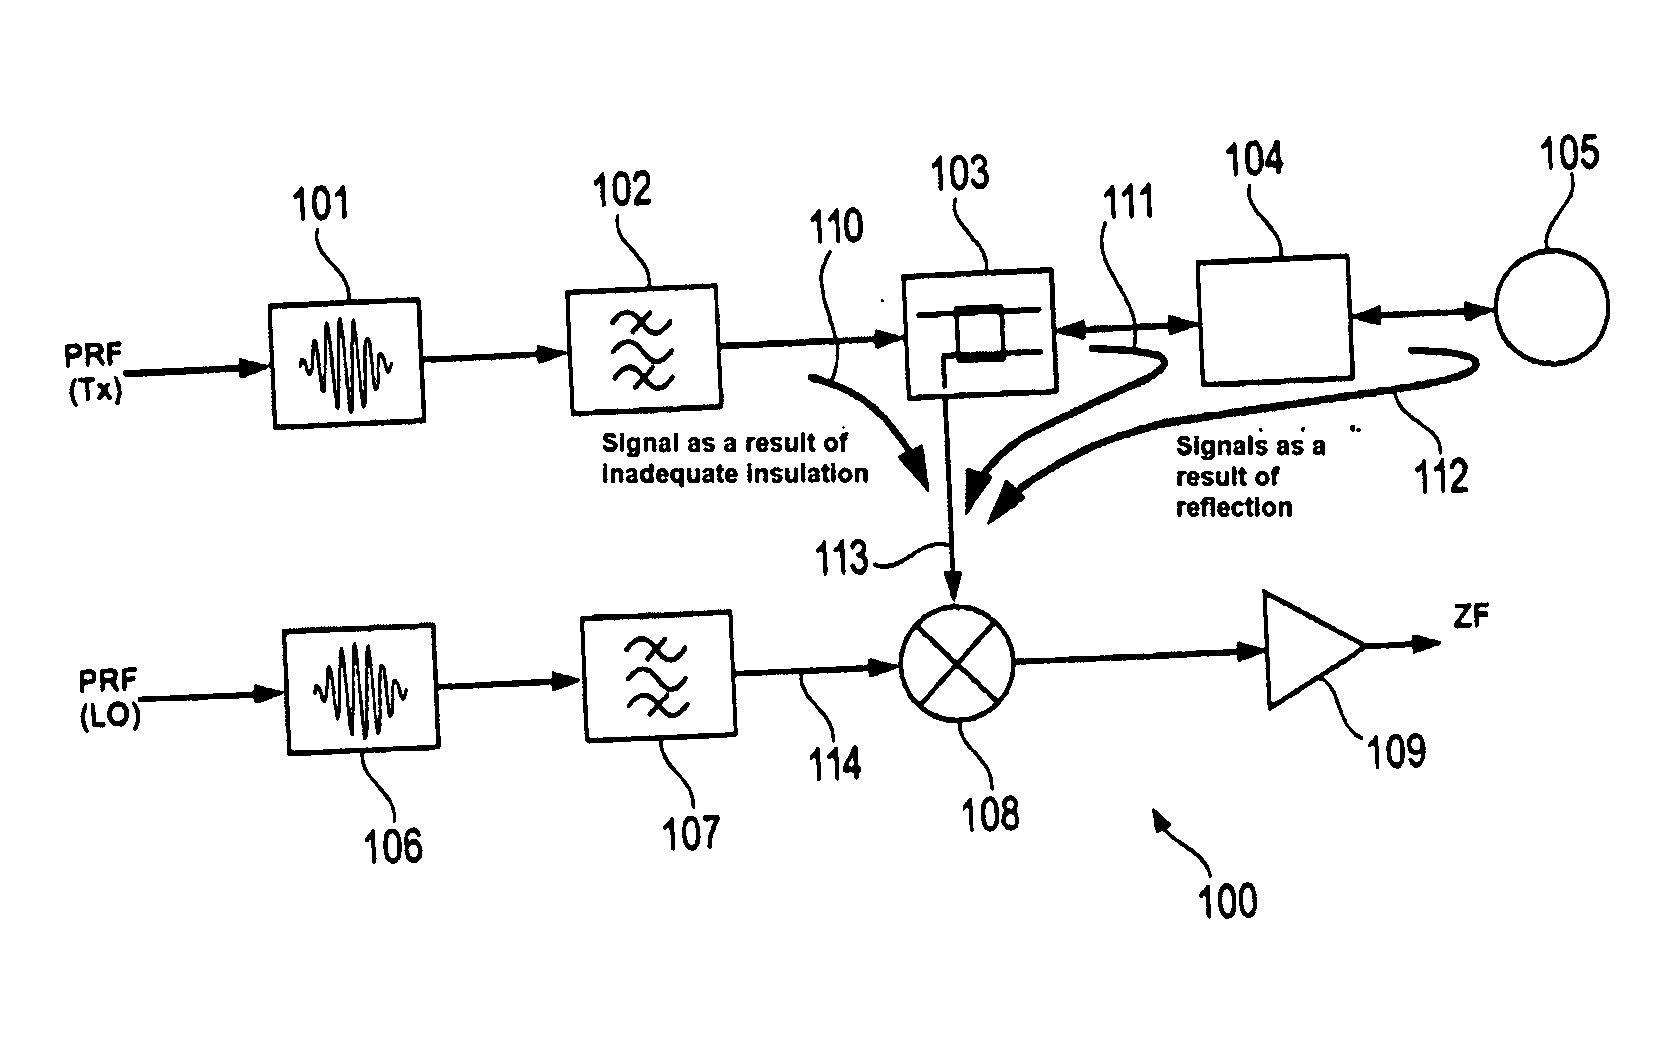 Independent Reference Pulse Generation